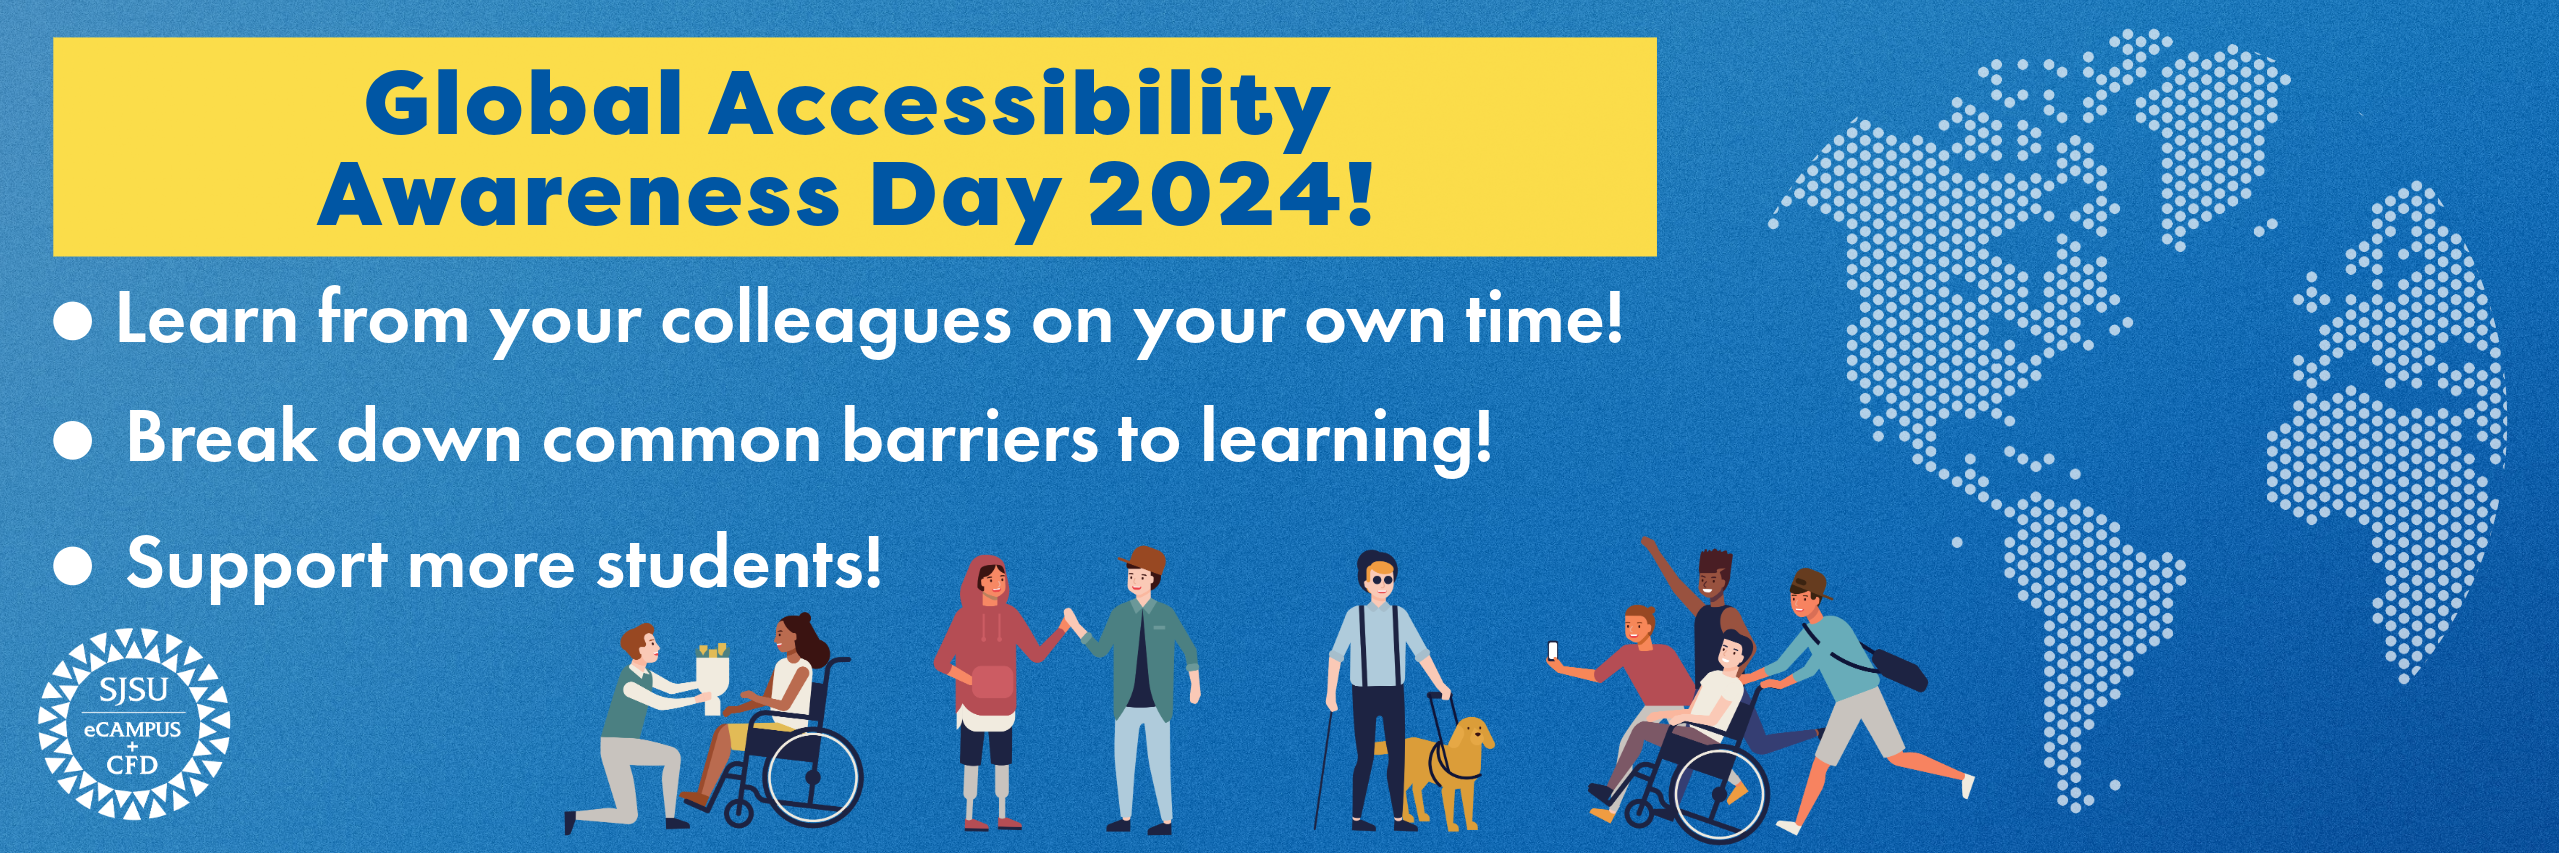 Global Accessibility Awareness Day 2024 Banner